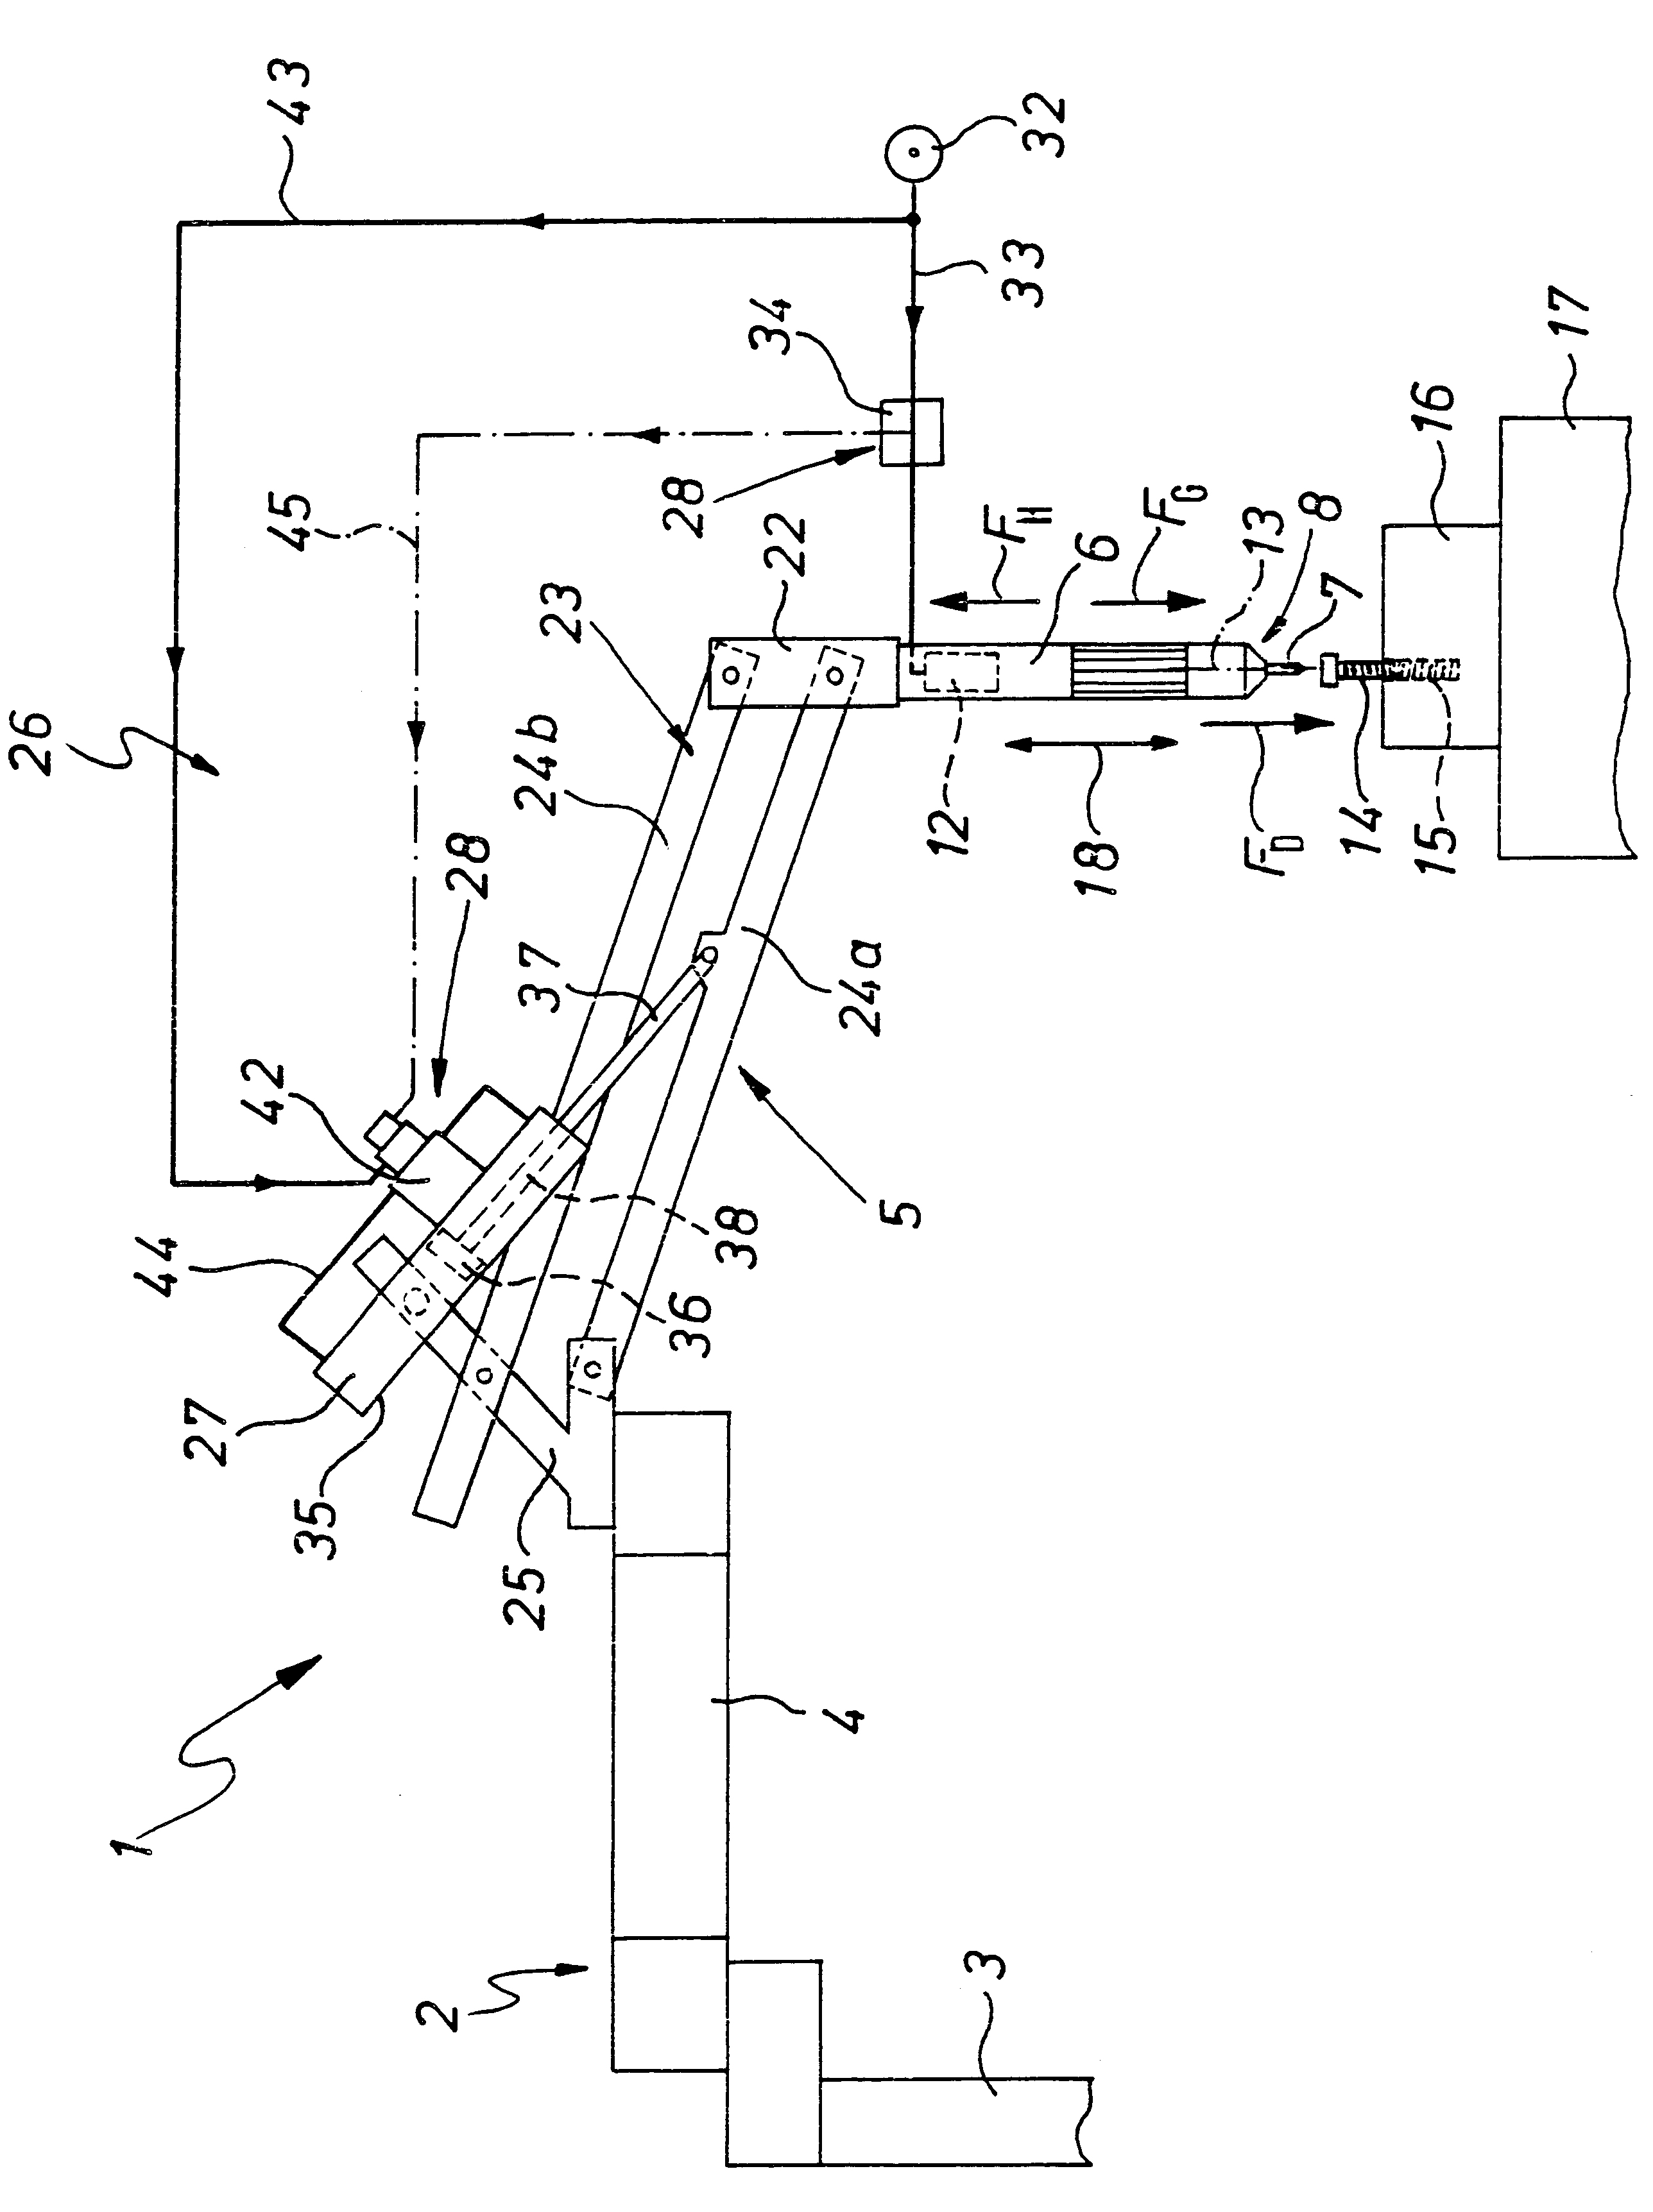 Device for the control of the thrust force of a manually operated pneumatic screw driver